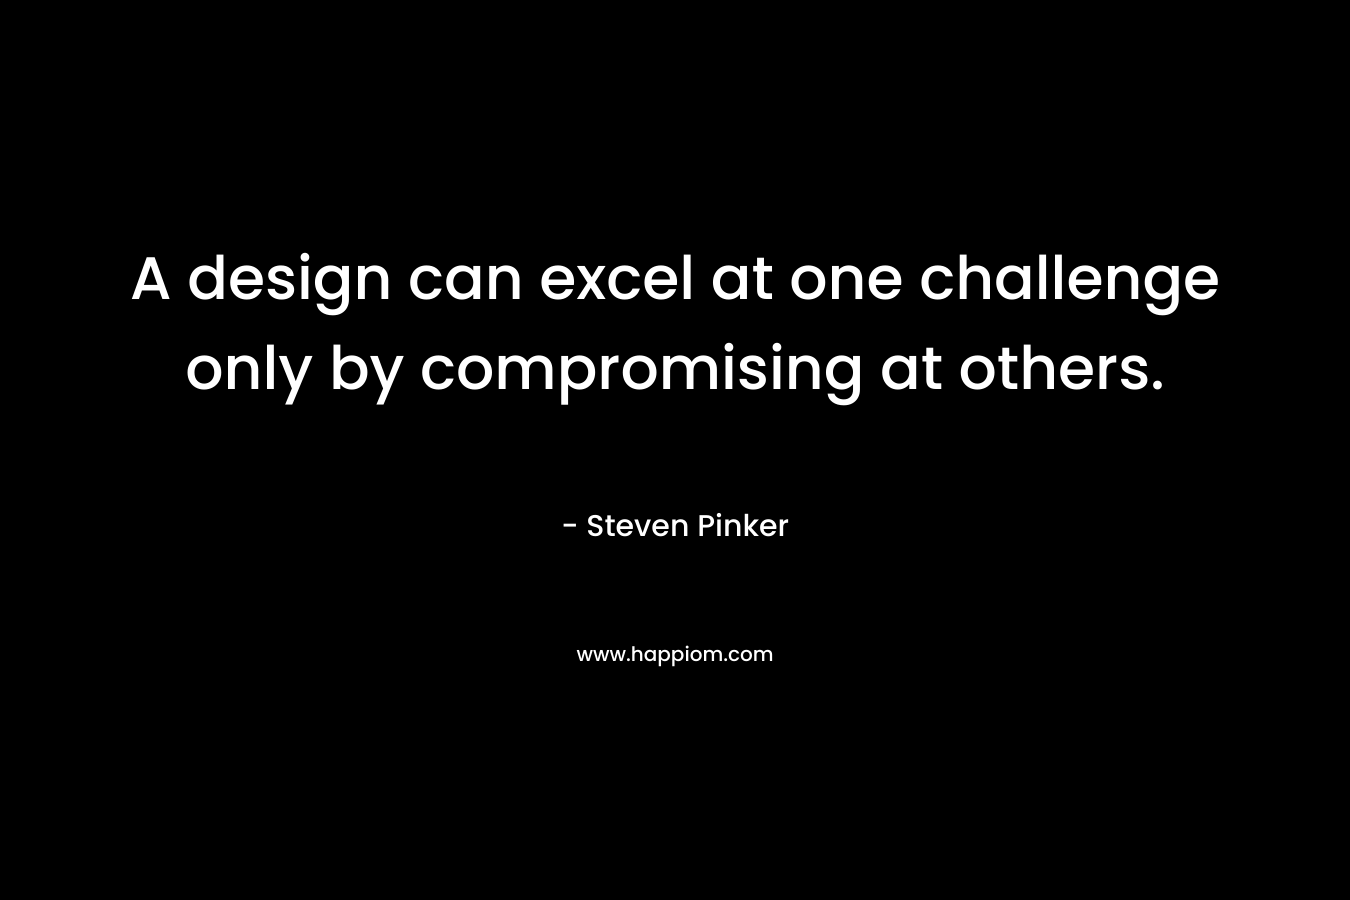 A design can excel at one challenge only by compromising at others.